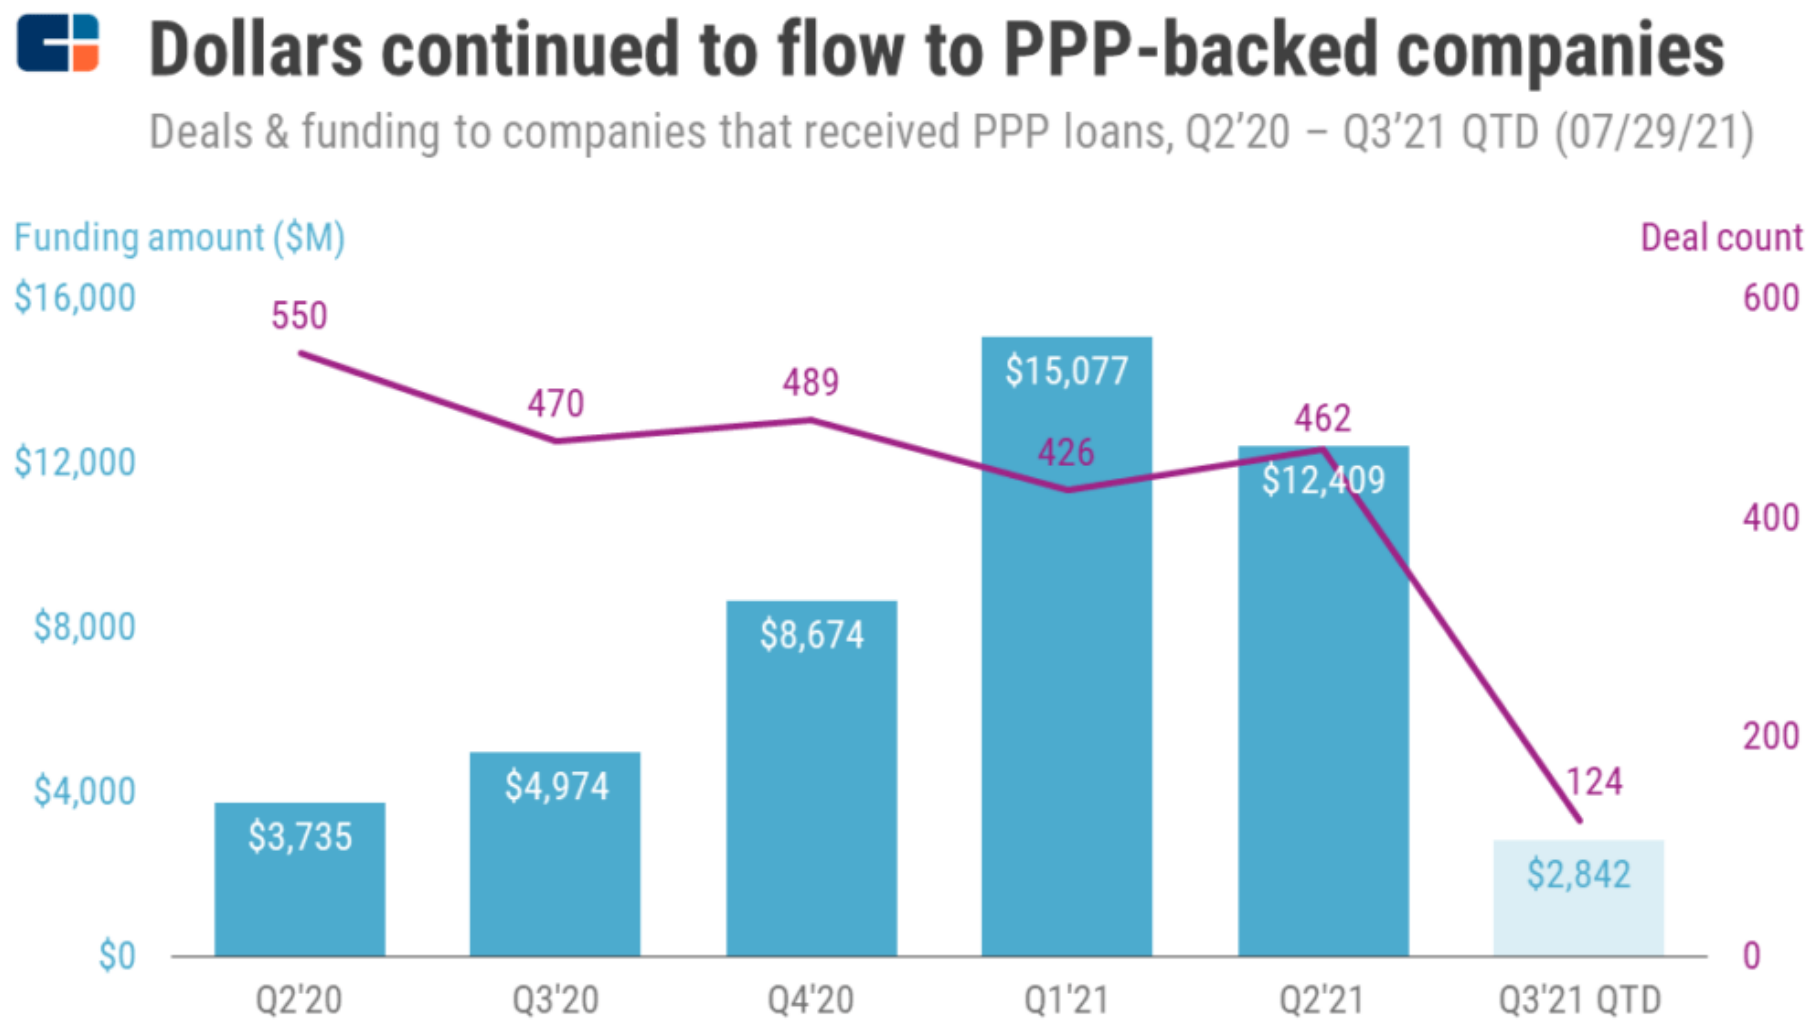 VC-backed funding for PPP recipients.